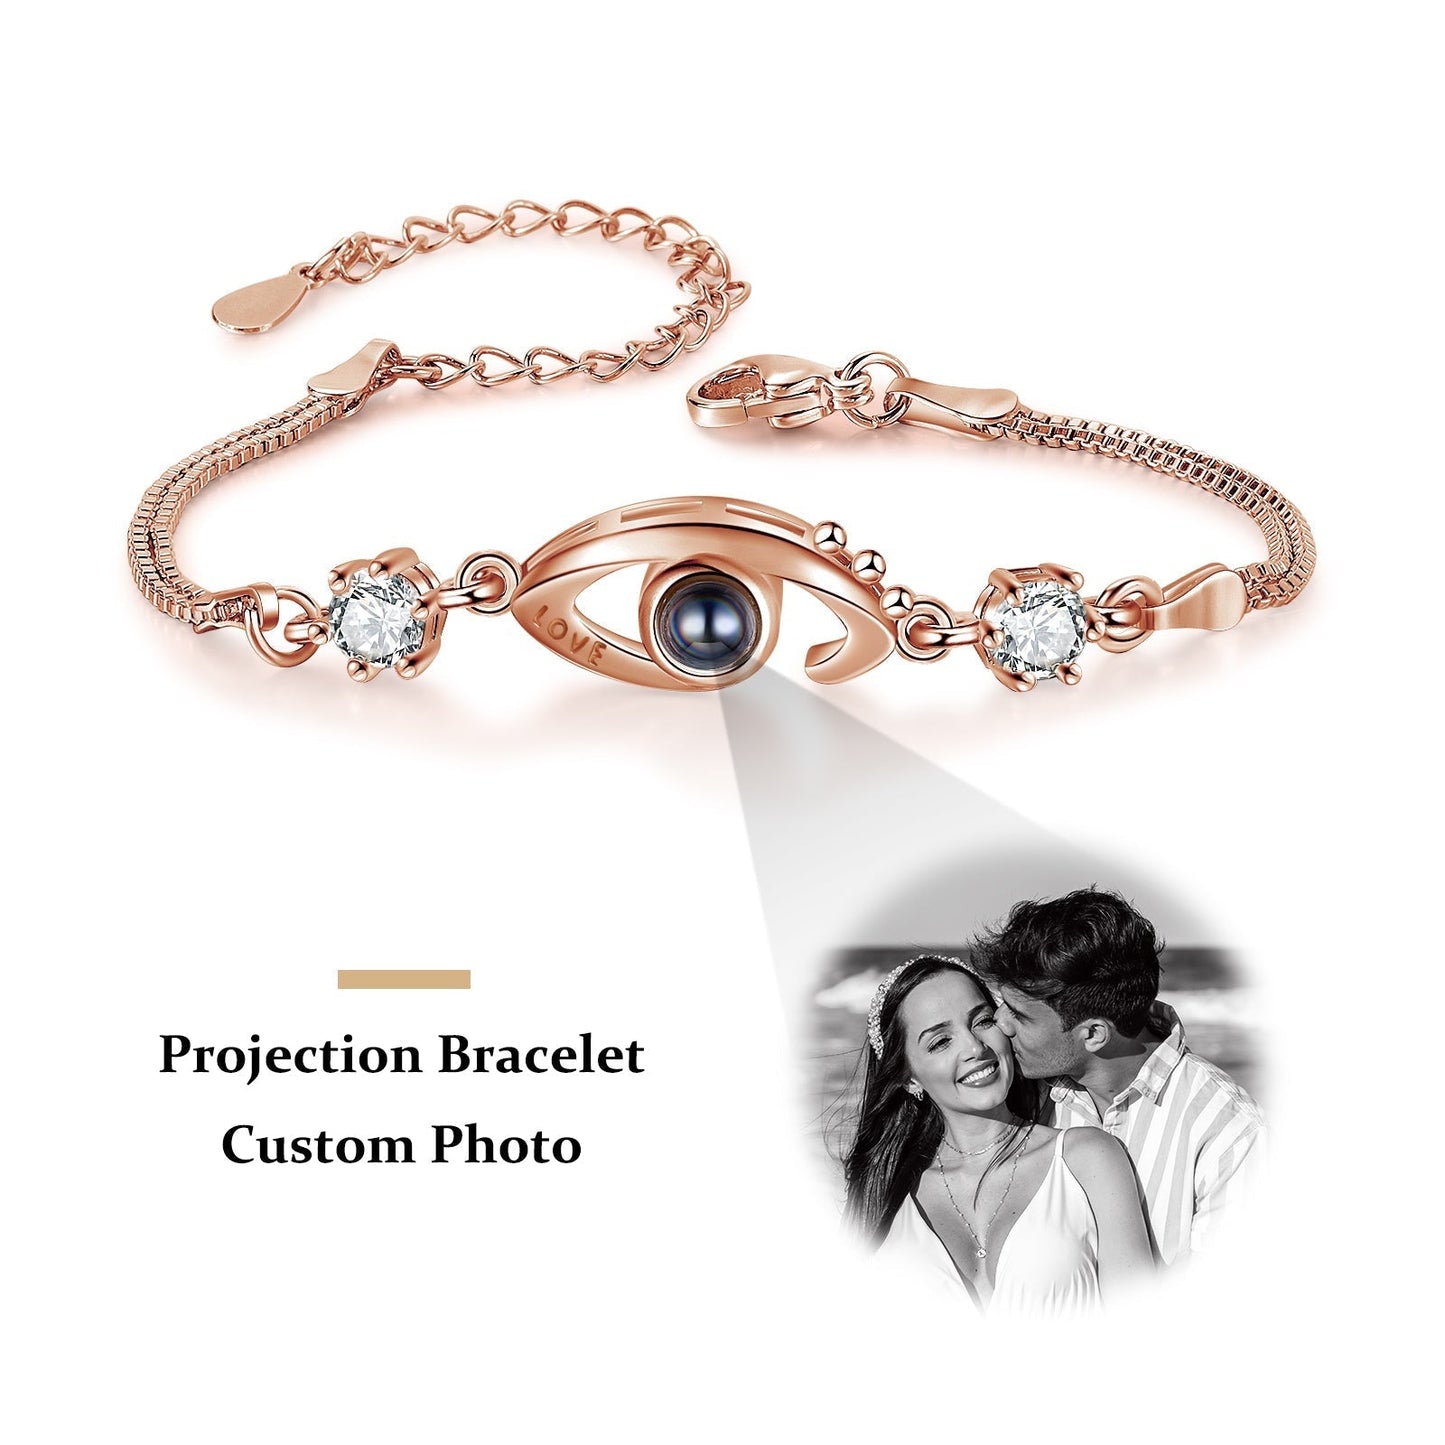 ThinkEngraved Projection necklace Black and White Photo / 14k Rose Gold over Surgical Steel Custom Seeing Eye Photo Projection Bracelet - Color or Black and White